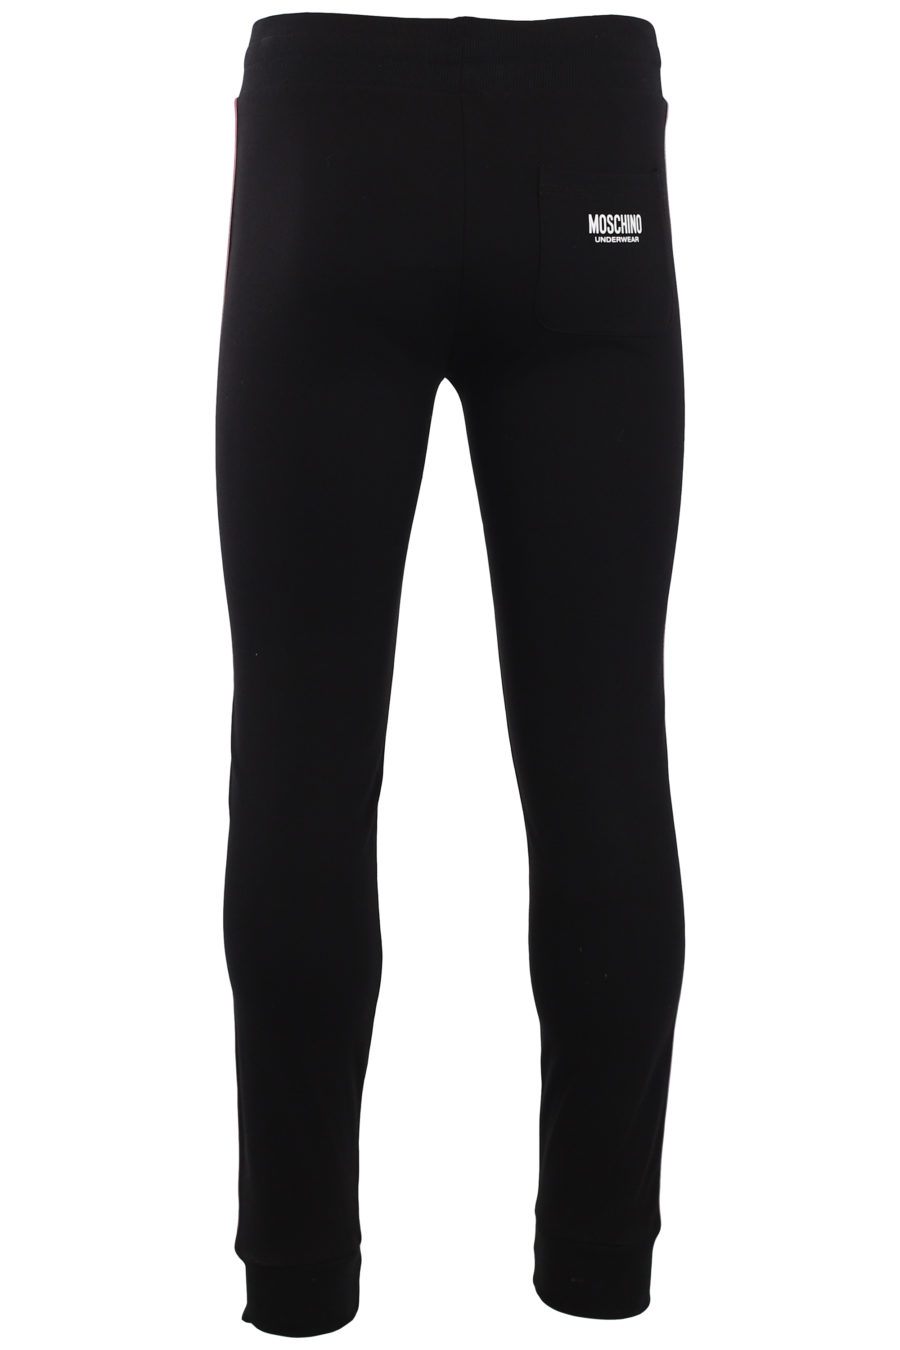 Tracksuit bottoms black with logo on the sides - IMG 9579